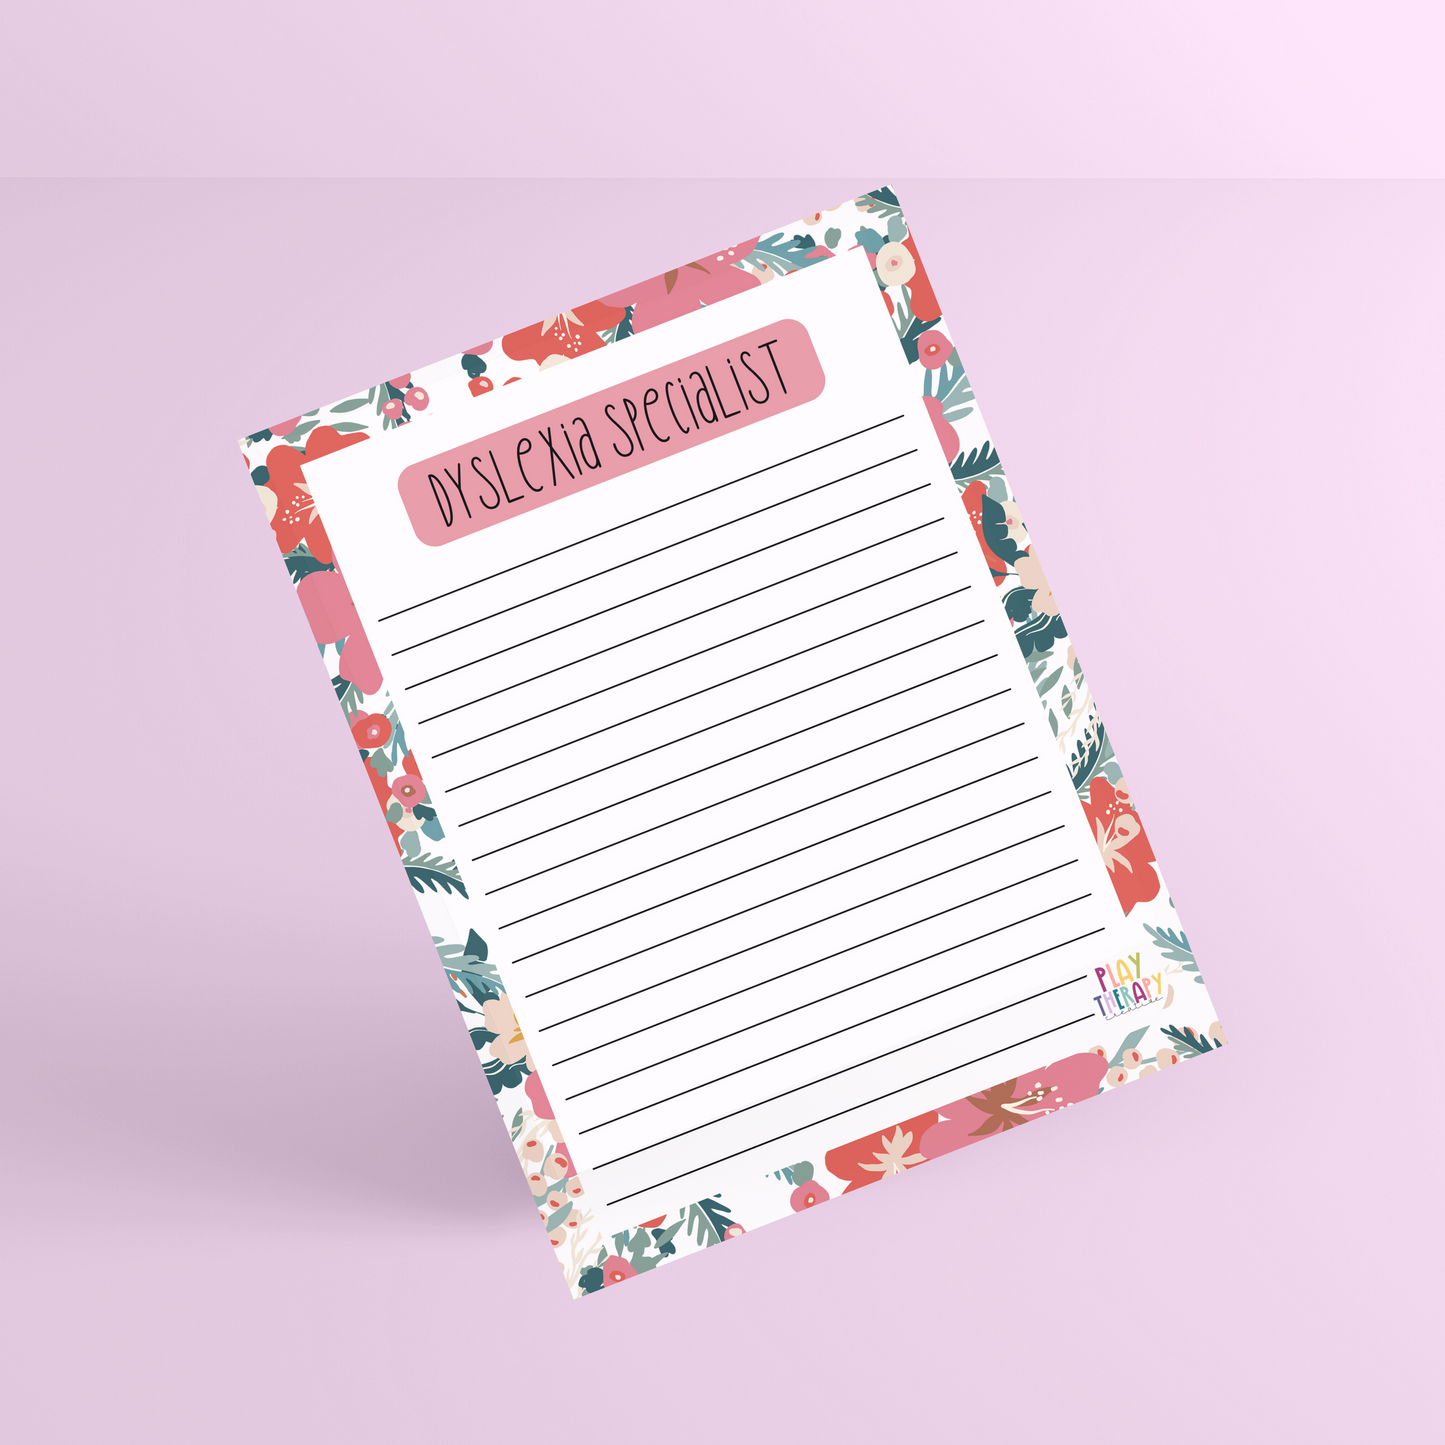 Floral Dyslexia Specialist Notepad